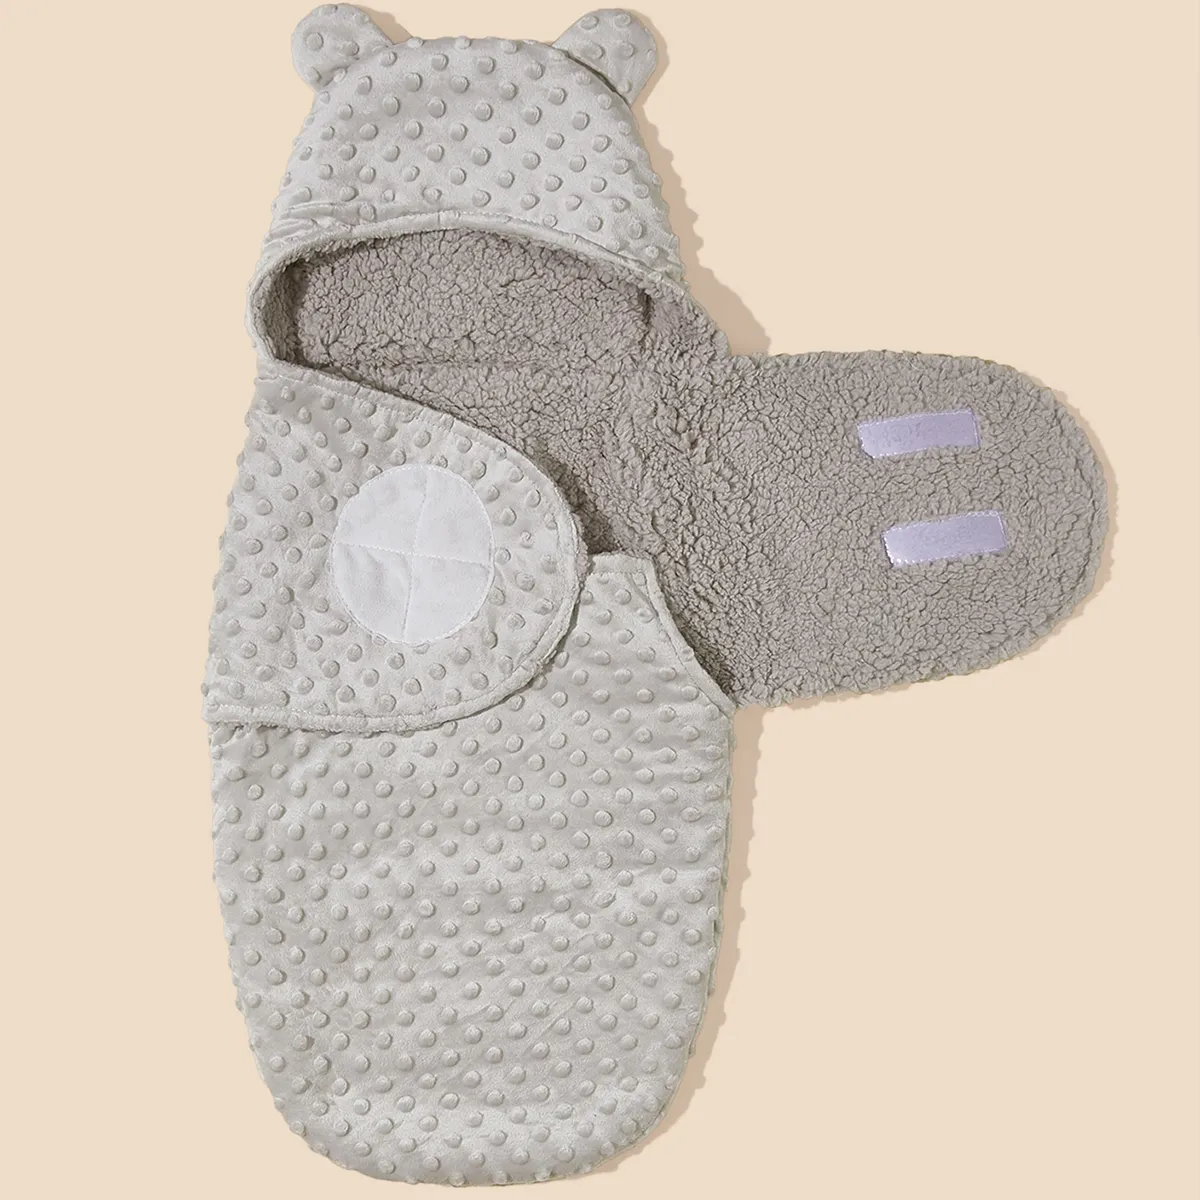 Newborn Baby Hooded Sleep Sack In Autumn And Winter: Made With Soft Velvet Material For Babies Up To 3 Months